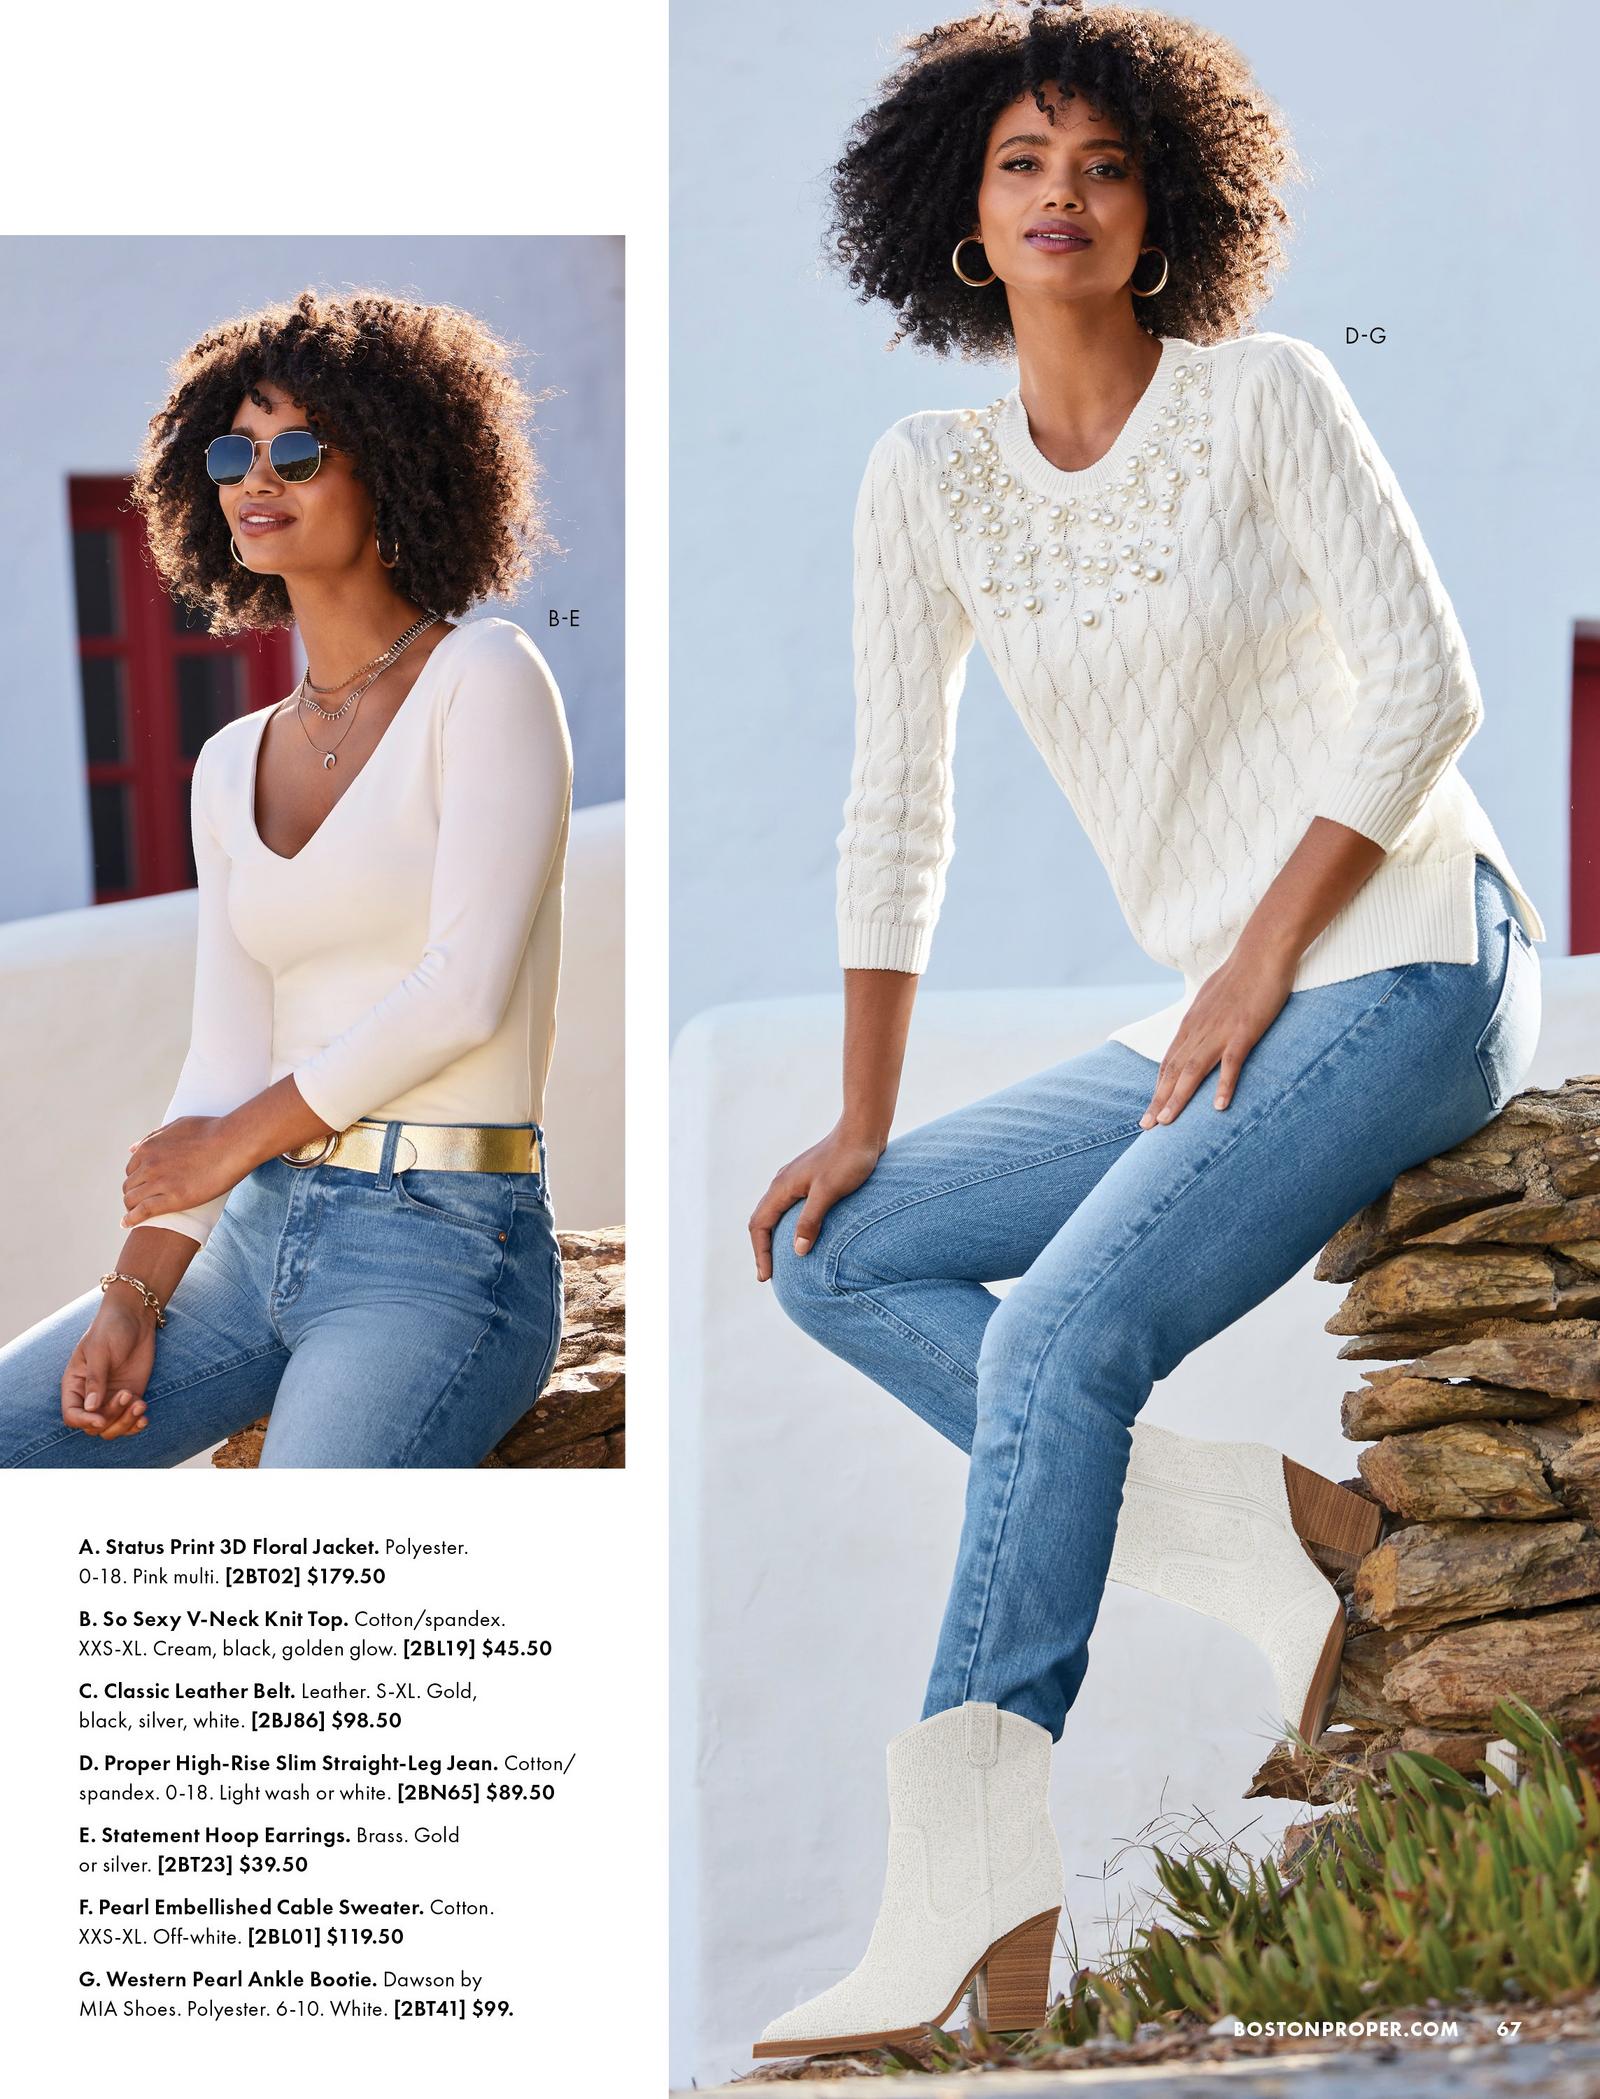 left model wearing a white v-neck three-quarter sleeve top, gold leather belt, jeans, gold hoop earrings, and sunglasses. right model wearing a white pearl embellished cable-knit sweater, jeans, white embellished heeled western booties, and gold hoop earrings.